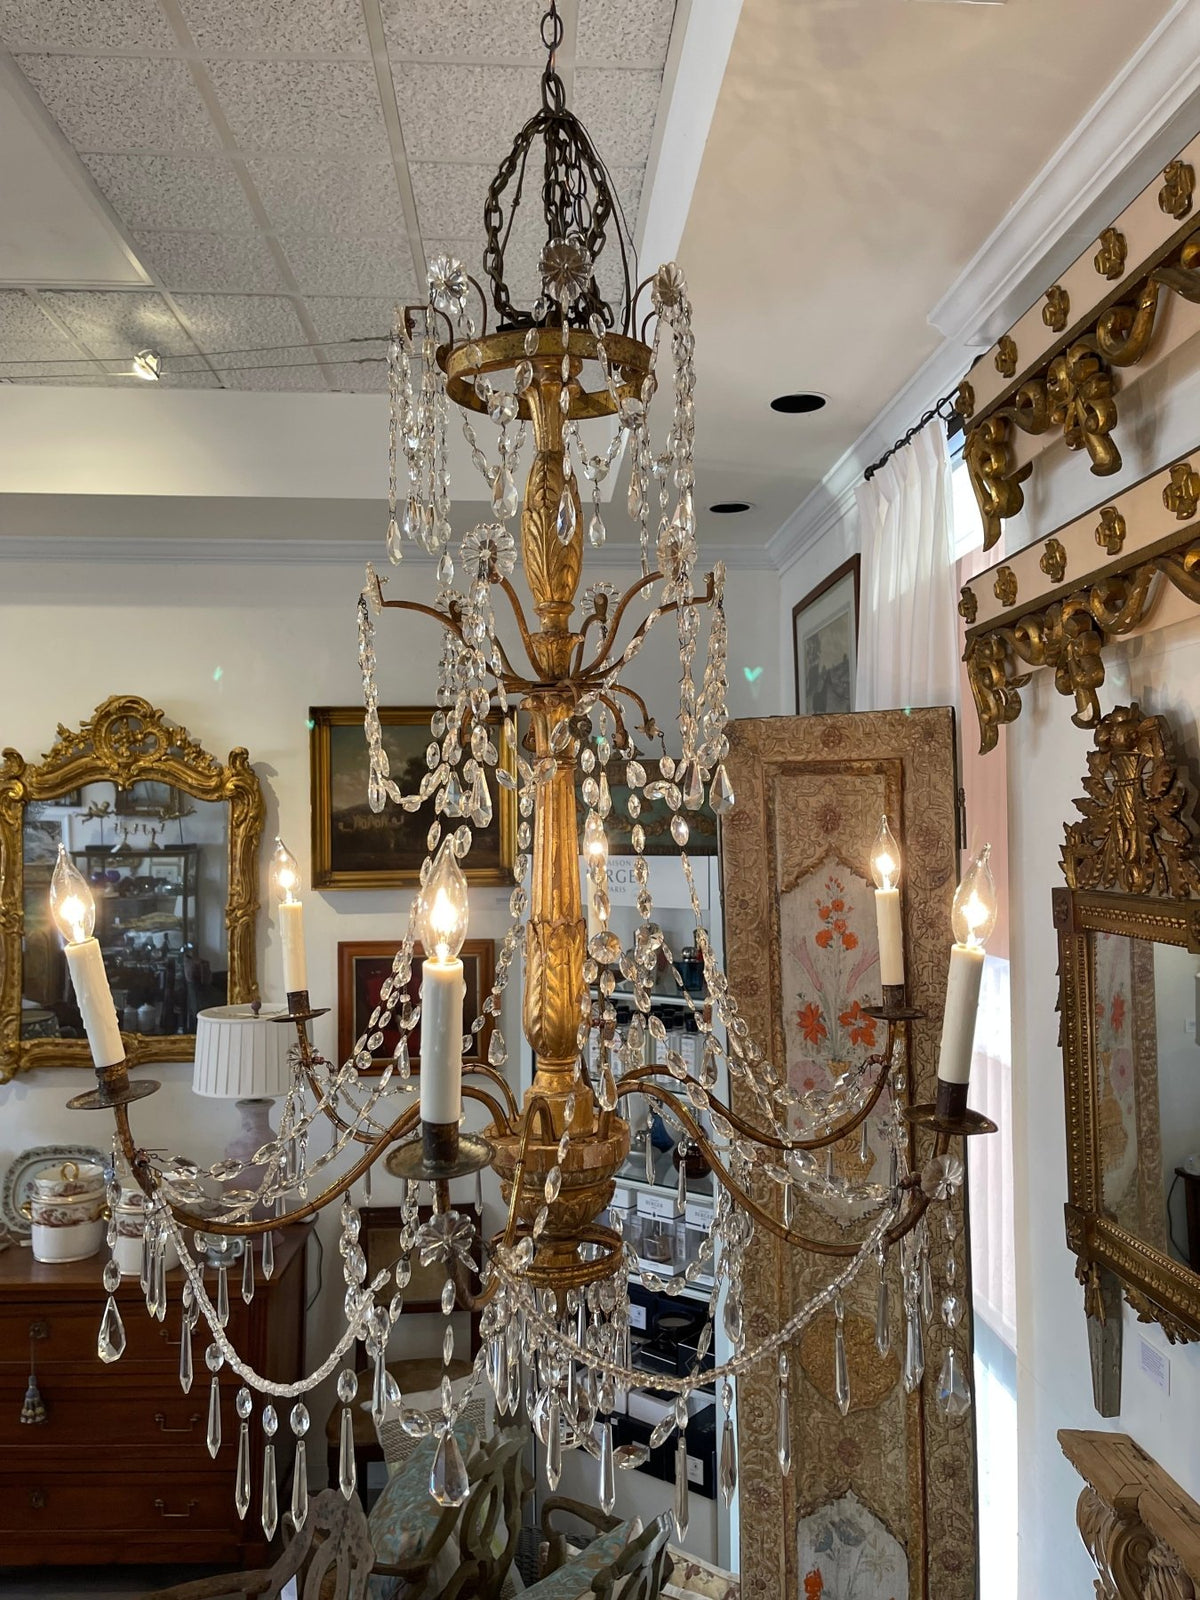 Late 18th Century - Early 19th Century Six Light Italian Genovese Chandelier - Helen Storey Antiques